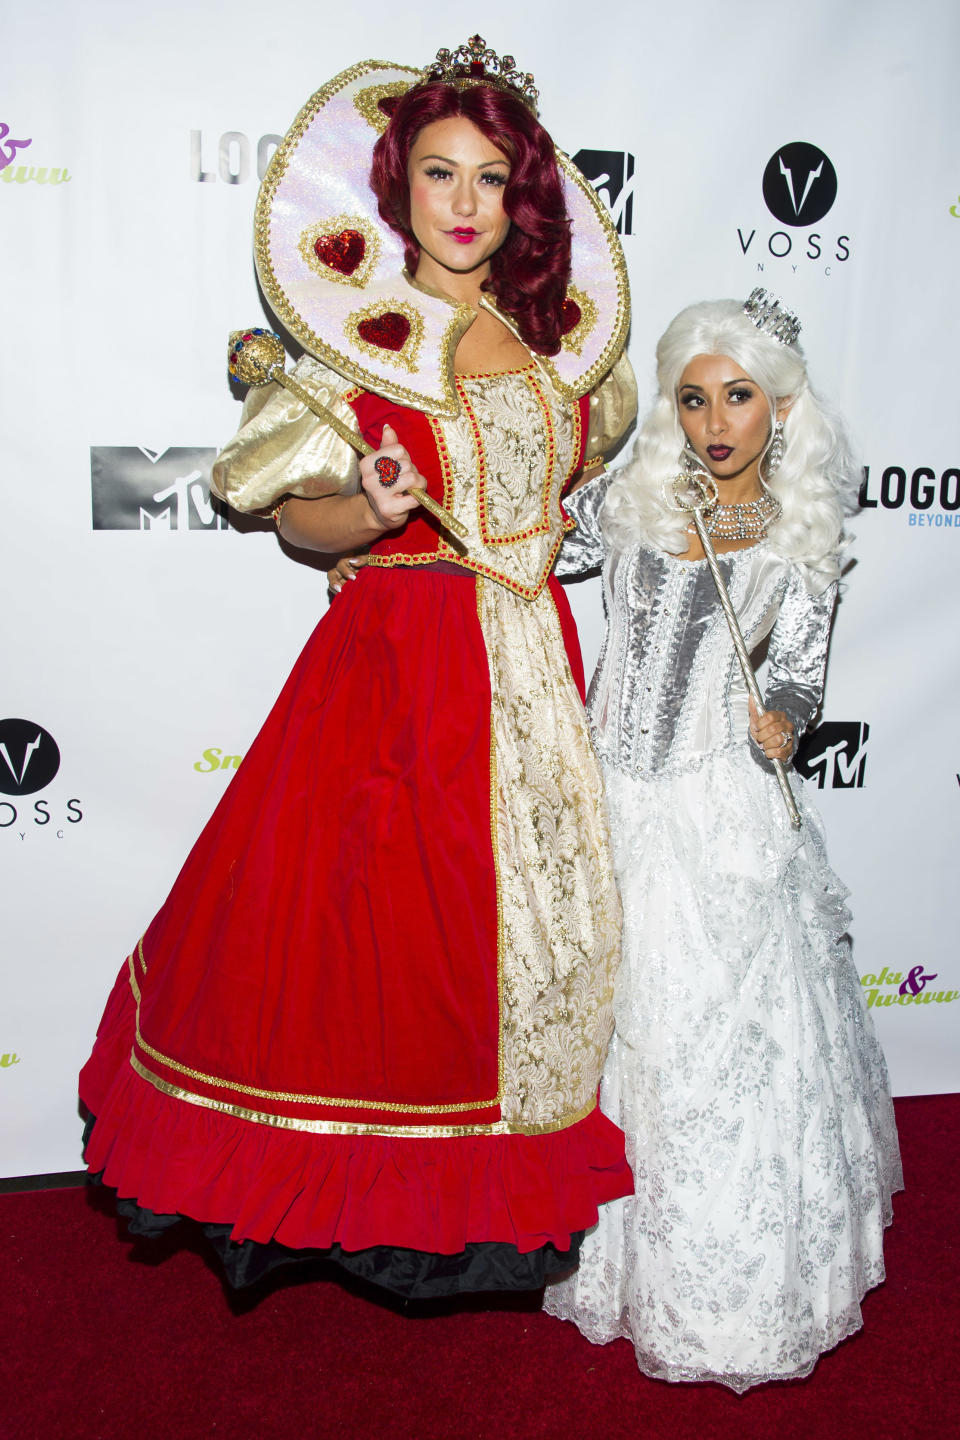 Jenni "JWoww" Farley, left, and Nicole "Snooki" Polizzi attend Night of the Living Drag: A RuPaul's Drag Race Halloween party on Friday, Oct. 25, 2013 in New York. (Photo by Charles Sykes/Invision/AP)